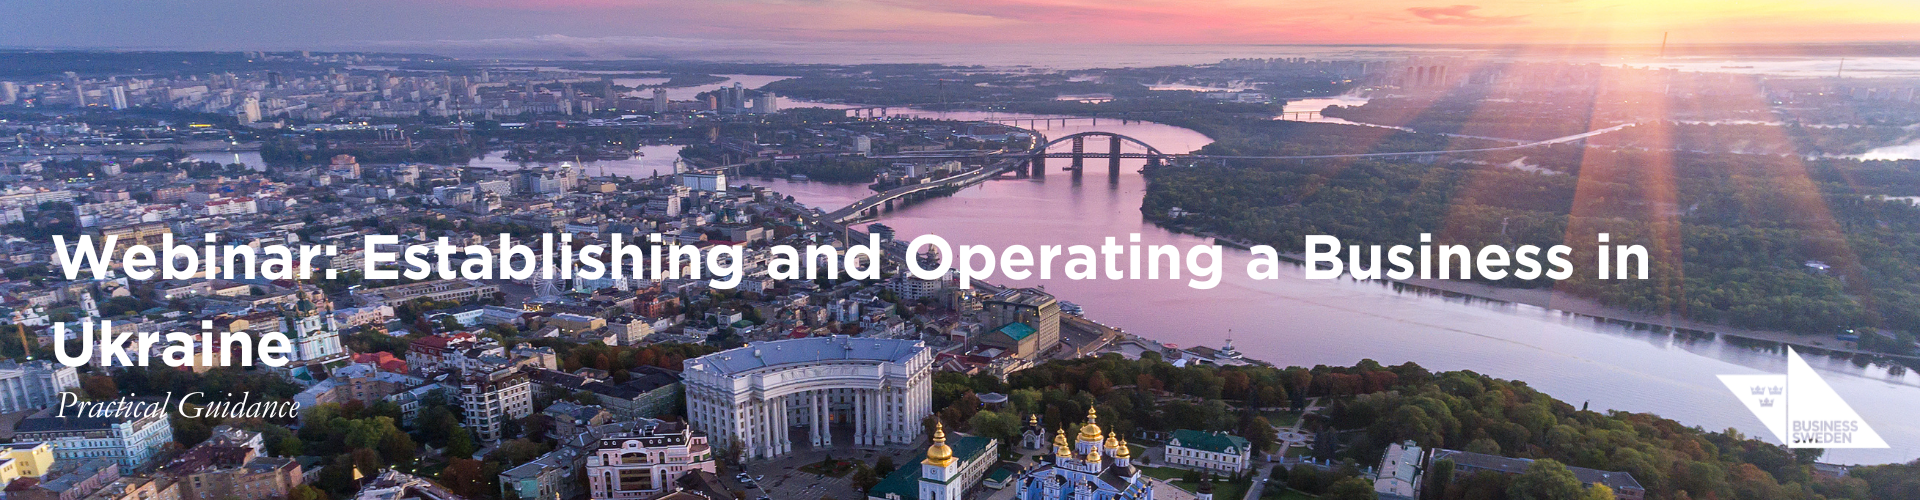 Header image for Establishing and Operating a Business in Ukraine: Practical Guidance 